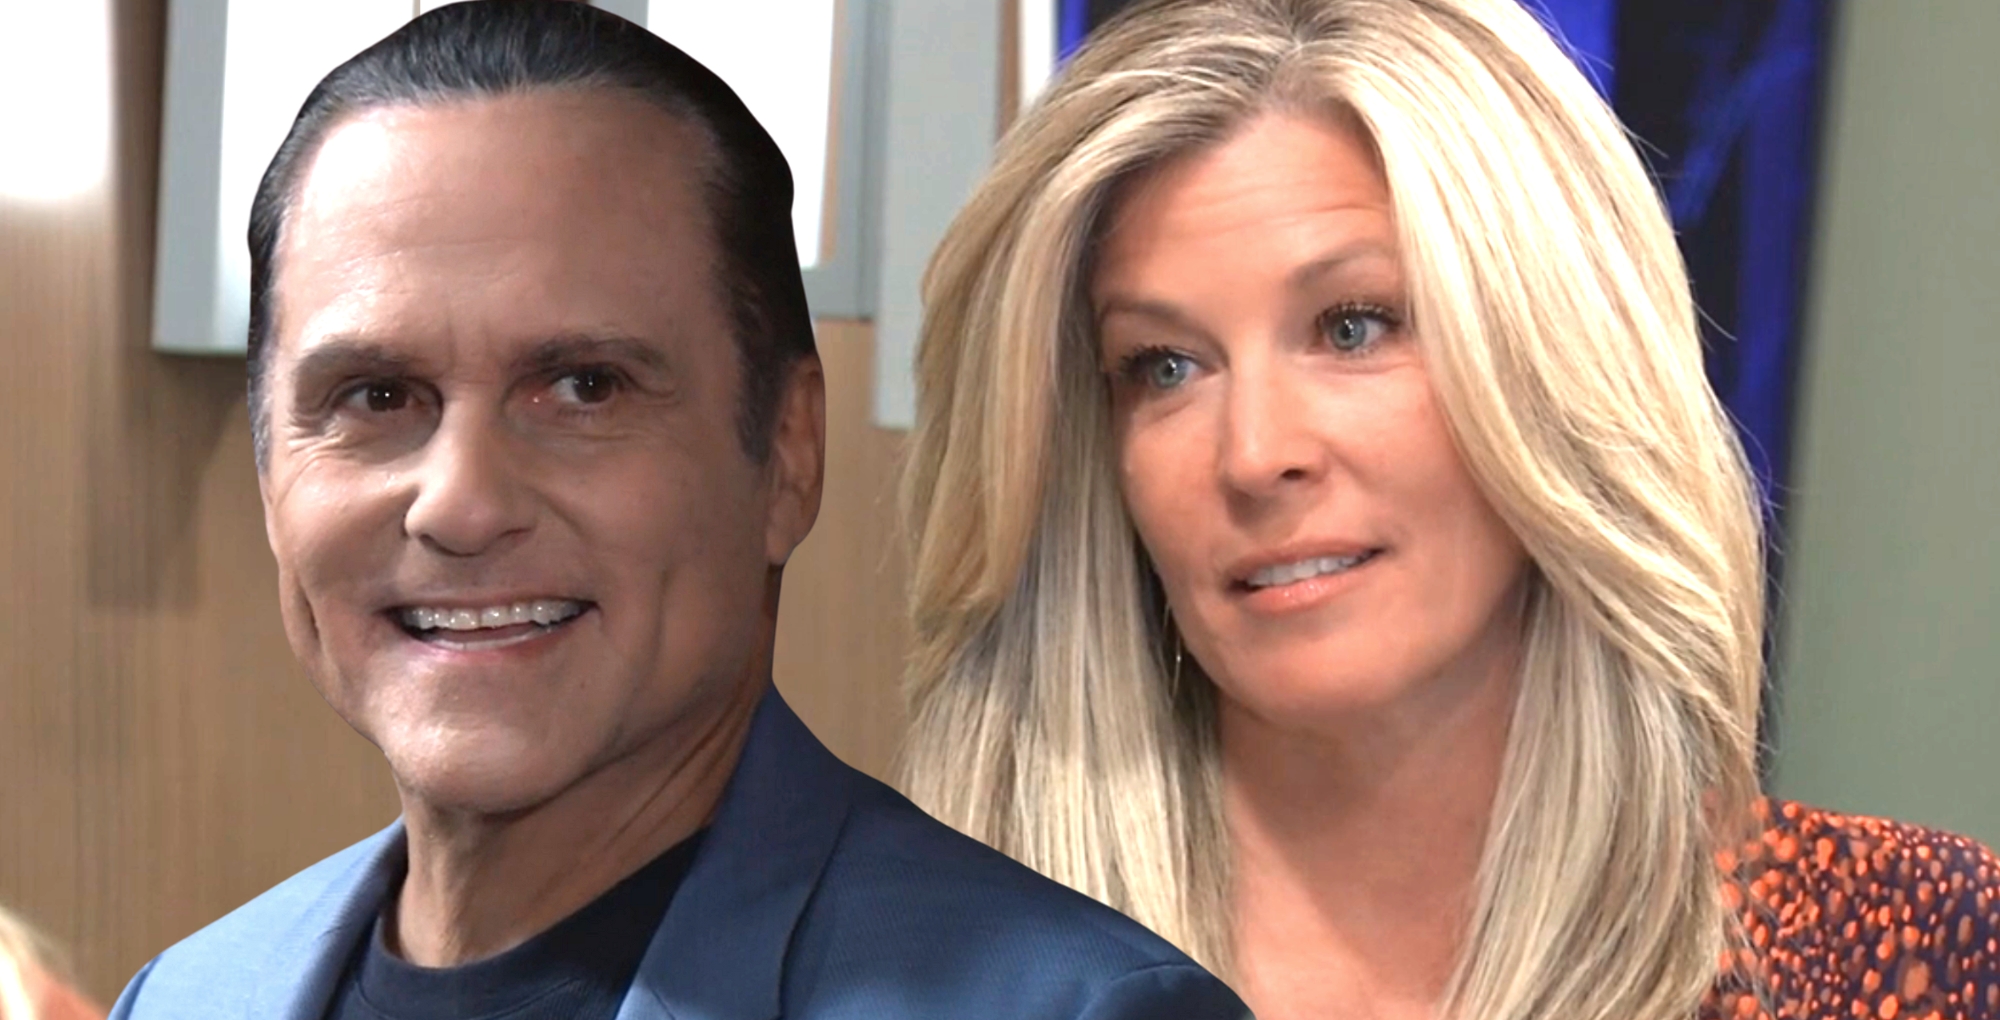 sonny corinthos and carly spencer on general hospital.